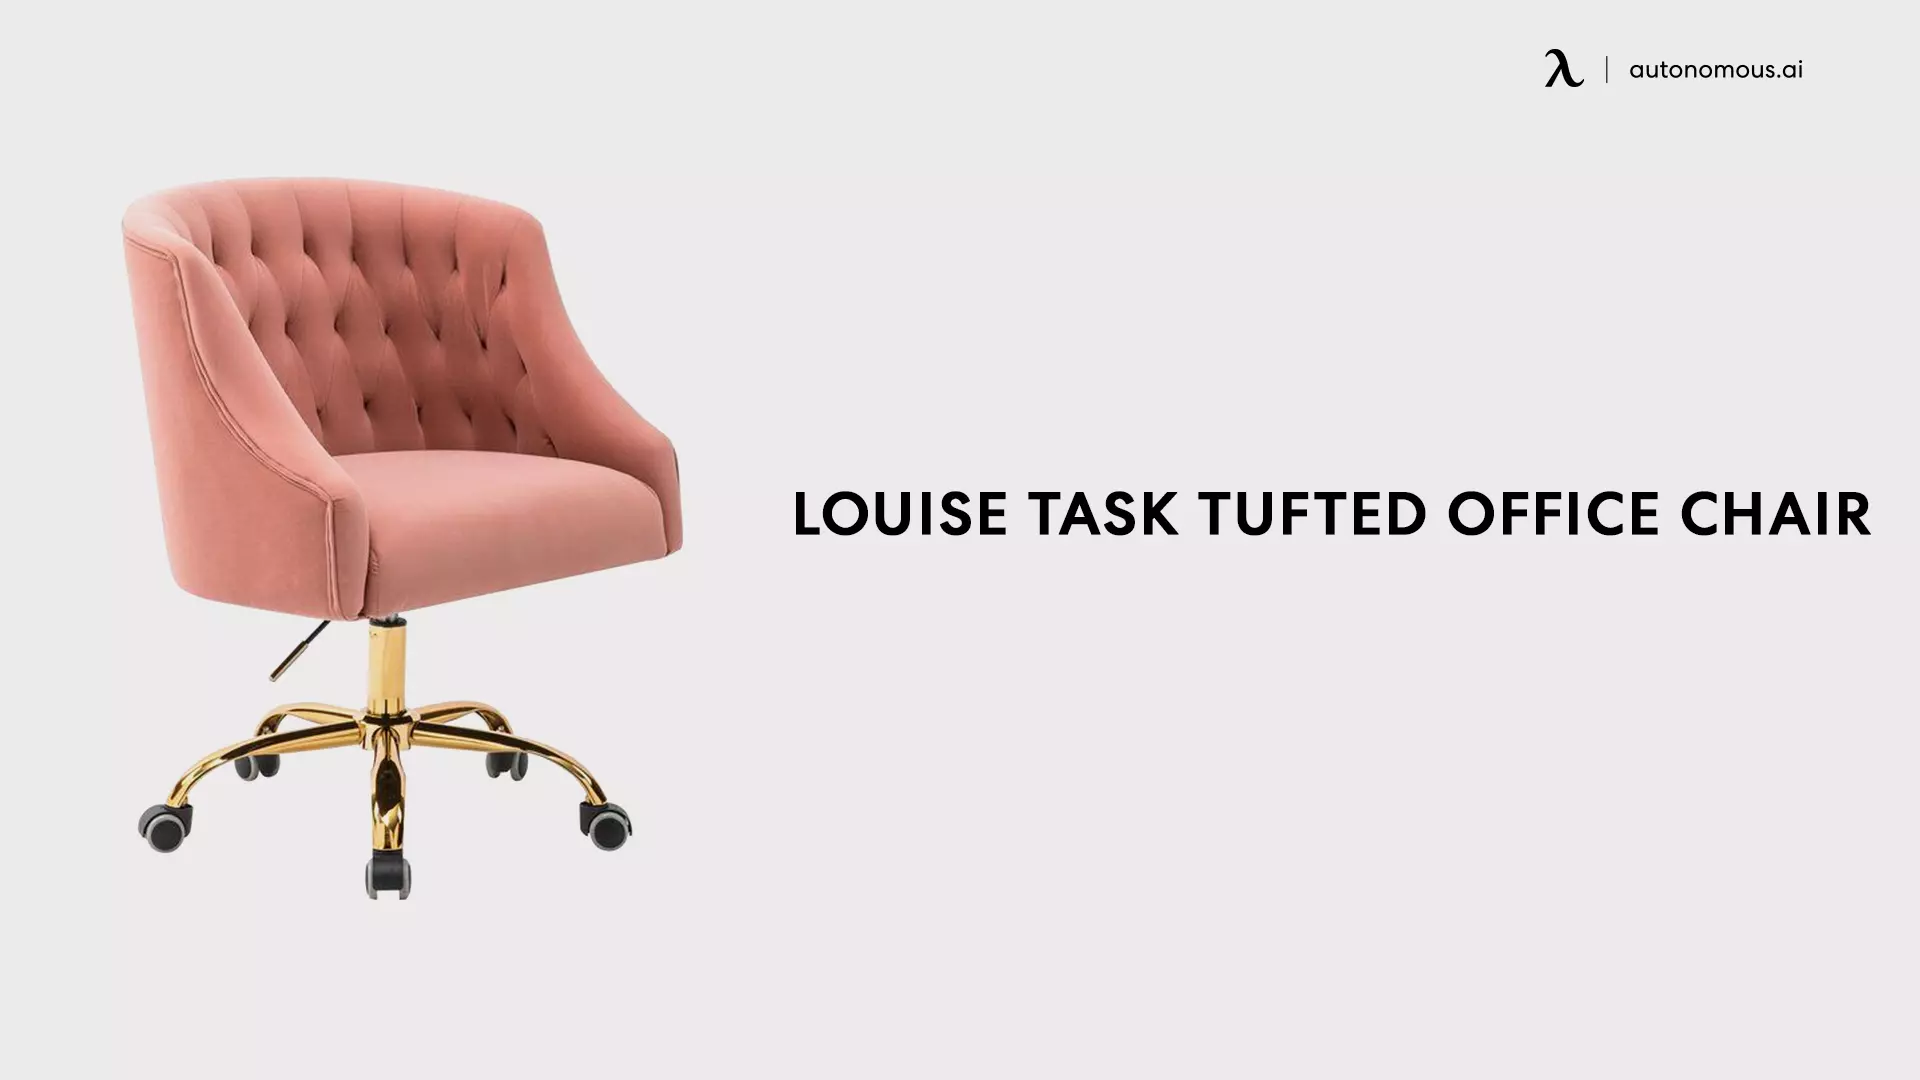 Louise Task Tufted Office Chair